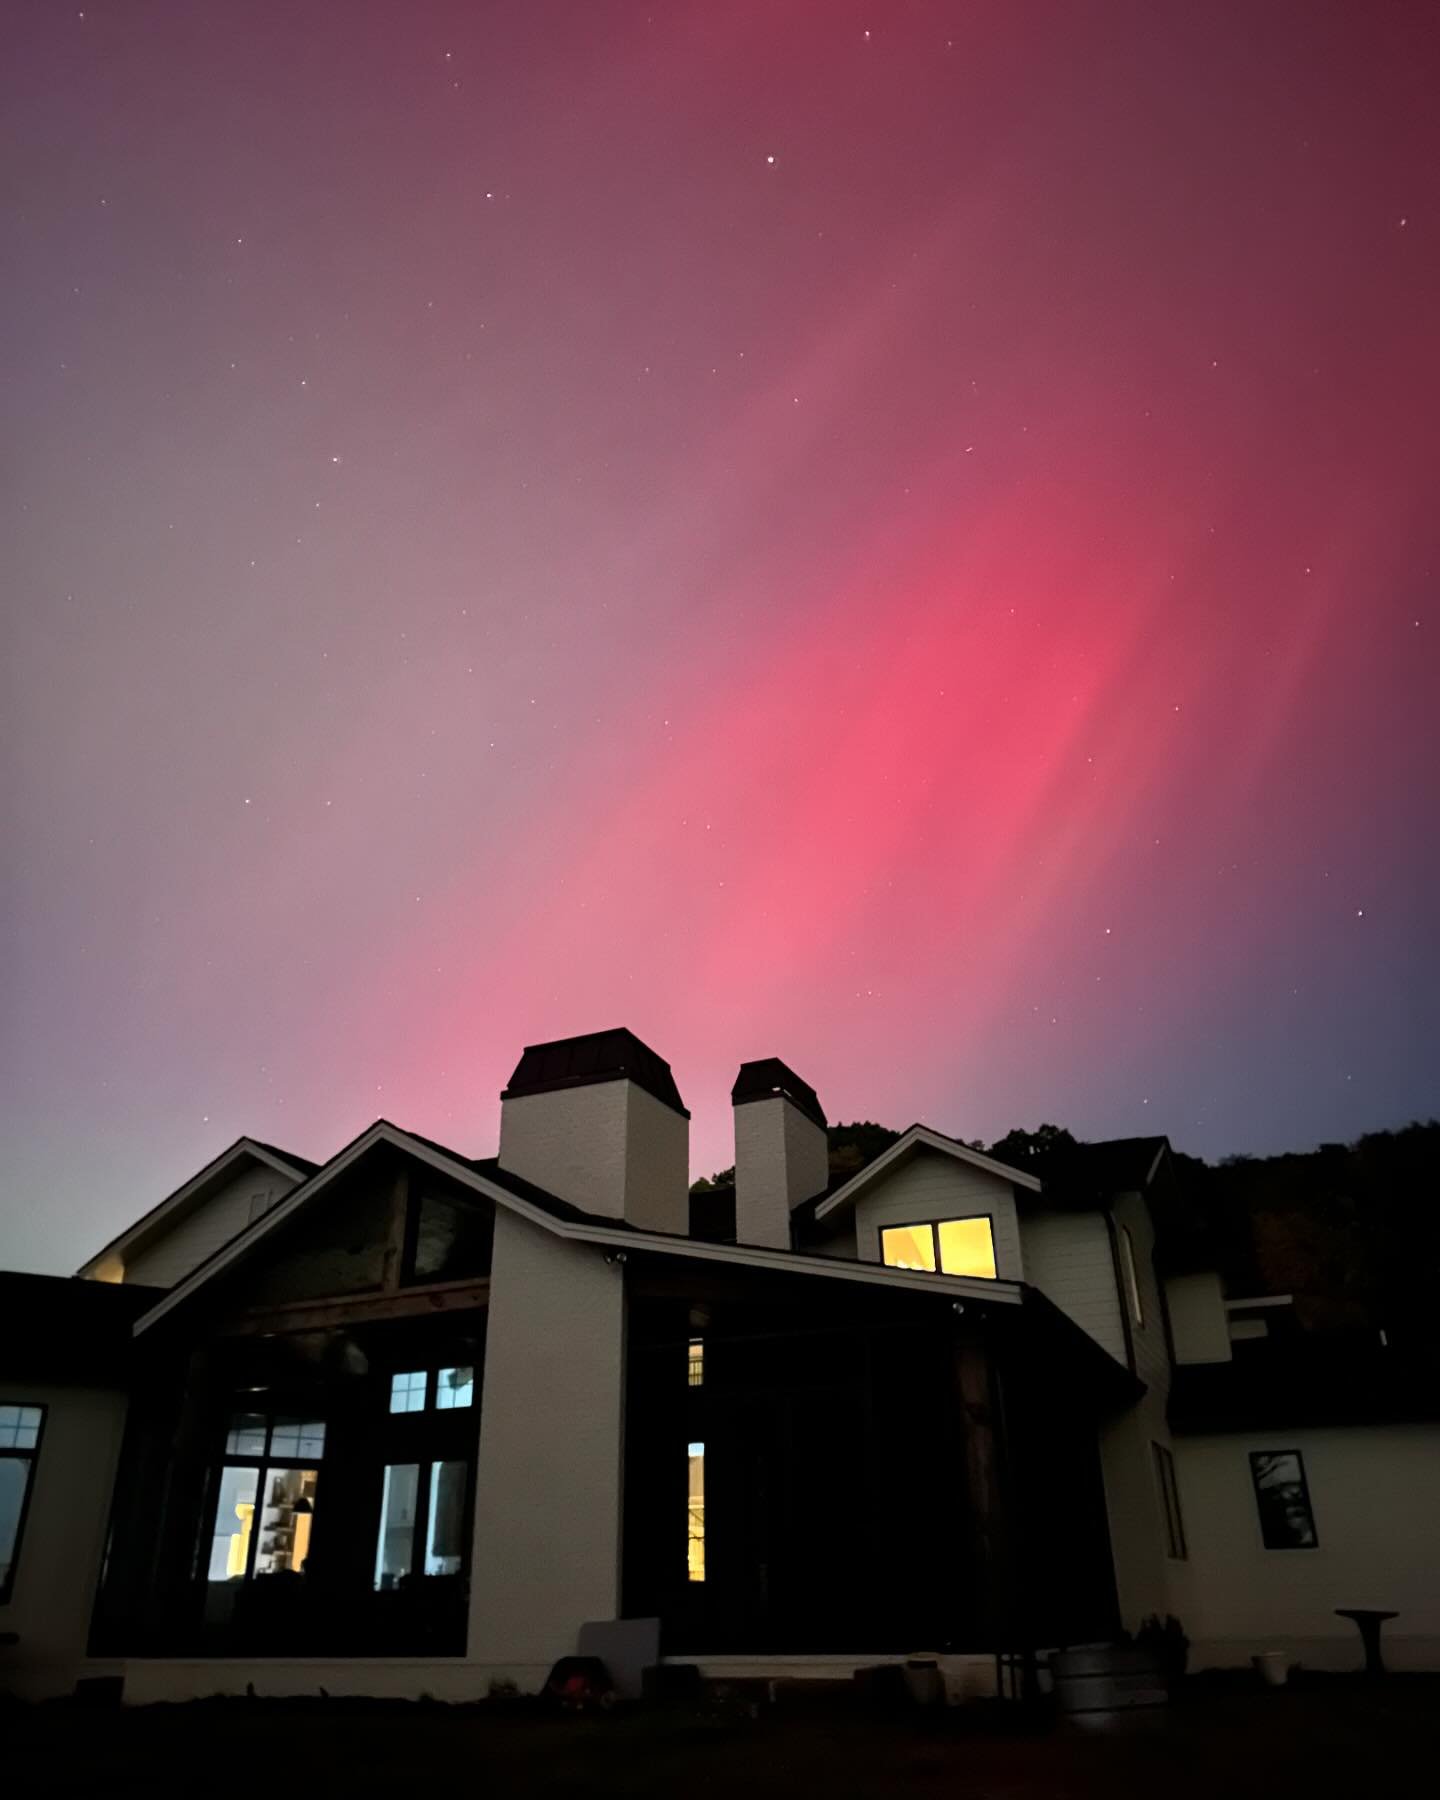 Northern Lights over my house in Knoxville??? What is even happening? I&rsquo;ve heard it&rsquo;s gonna be even better in the middle of the night, so Eleanor and I are setting an alarm for 1:45 to get up and look!